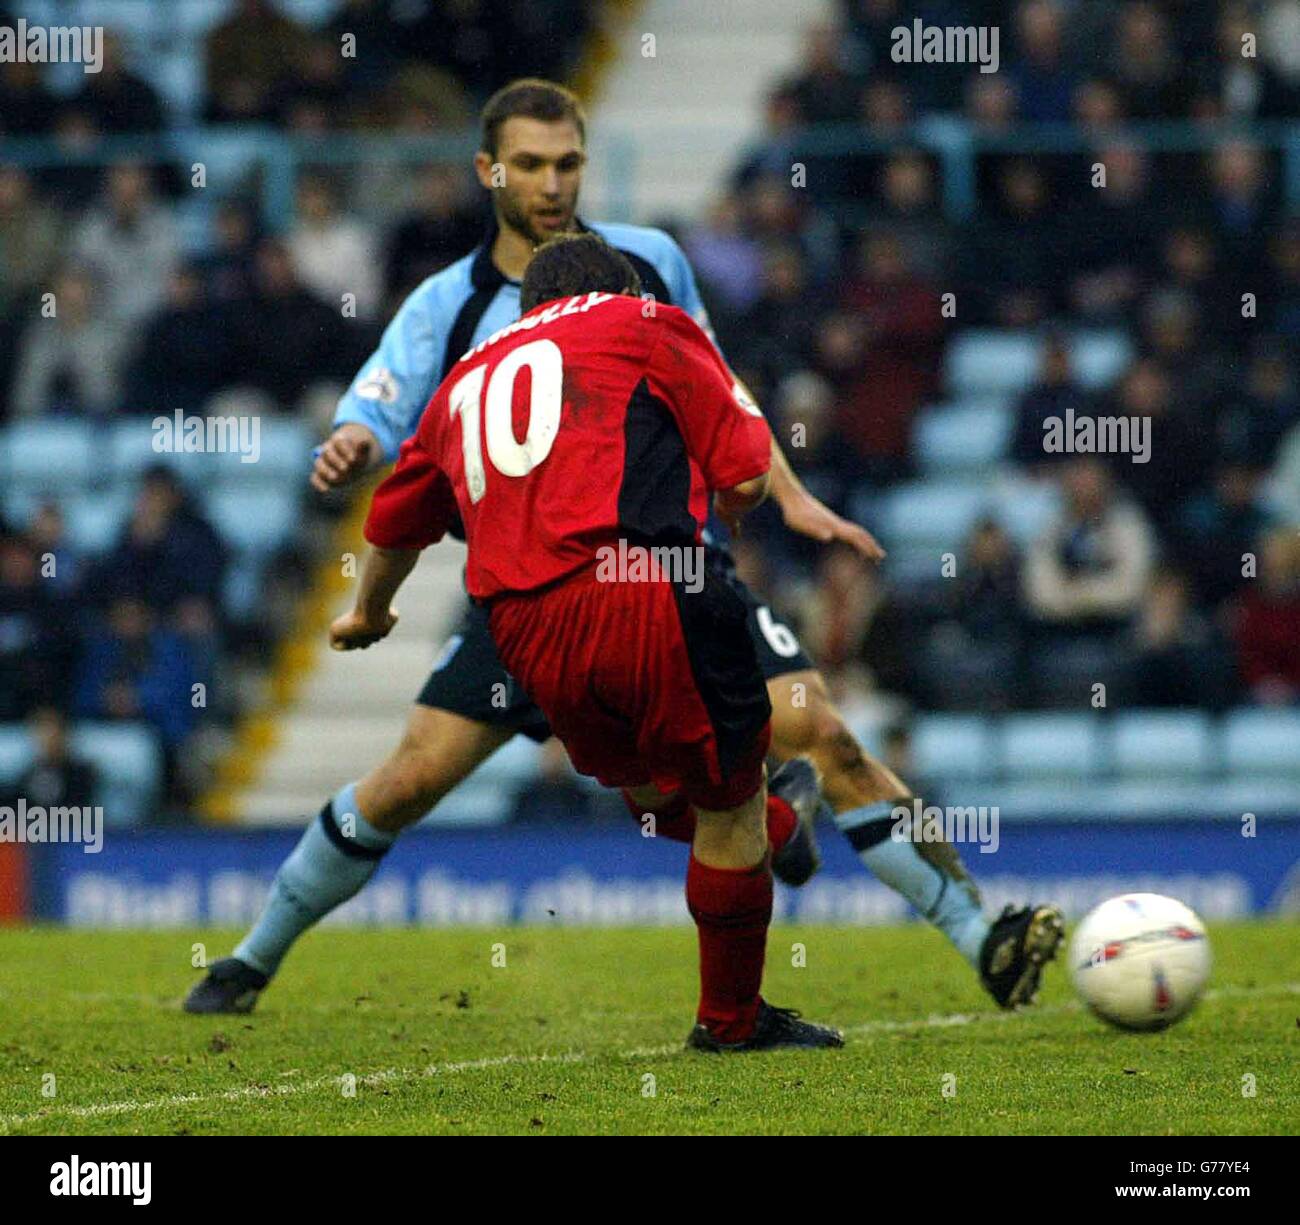 David Connolly of Wimbledon taking a successful shot on the Coventry goal, during the Nationwide Division One match at The Highfield Road Stadium, Coventry. NO UNOFFICIAL CLUB WEBSITE USE. Stock Photo